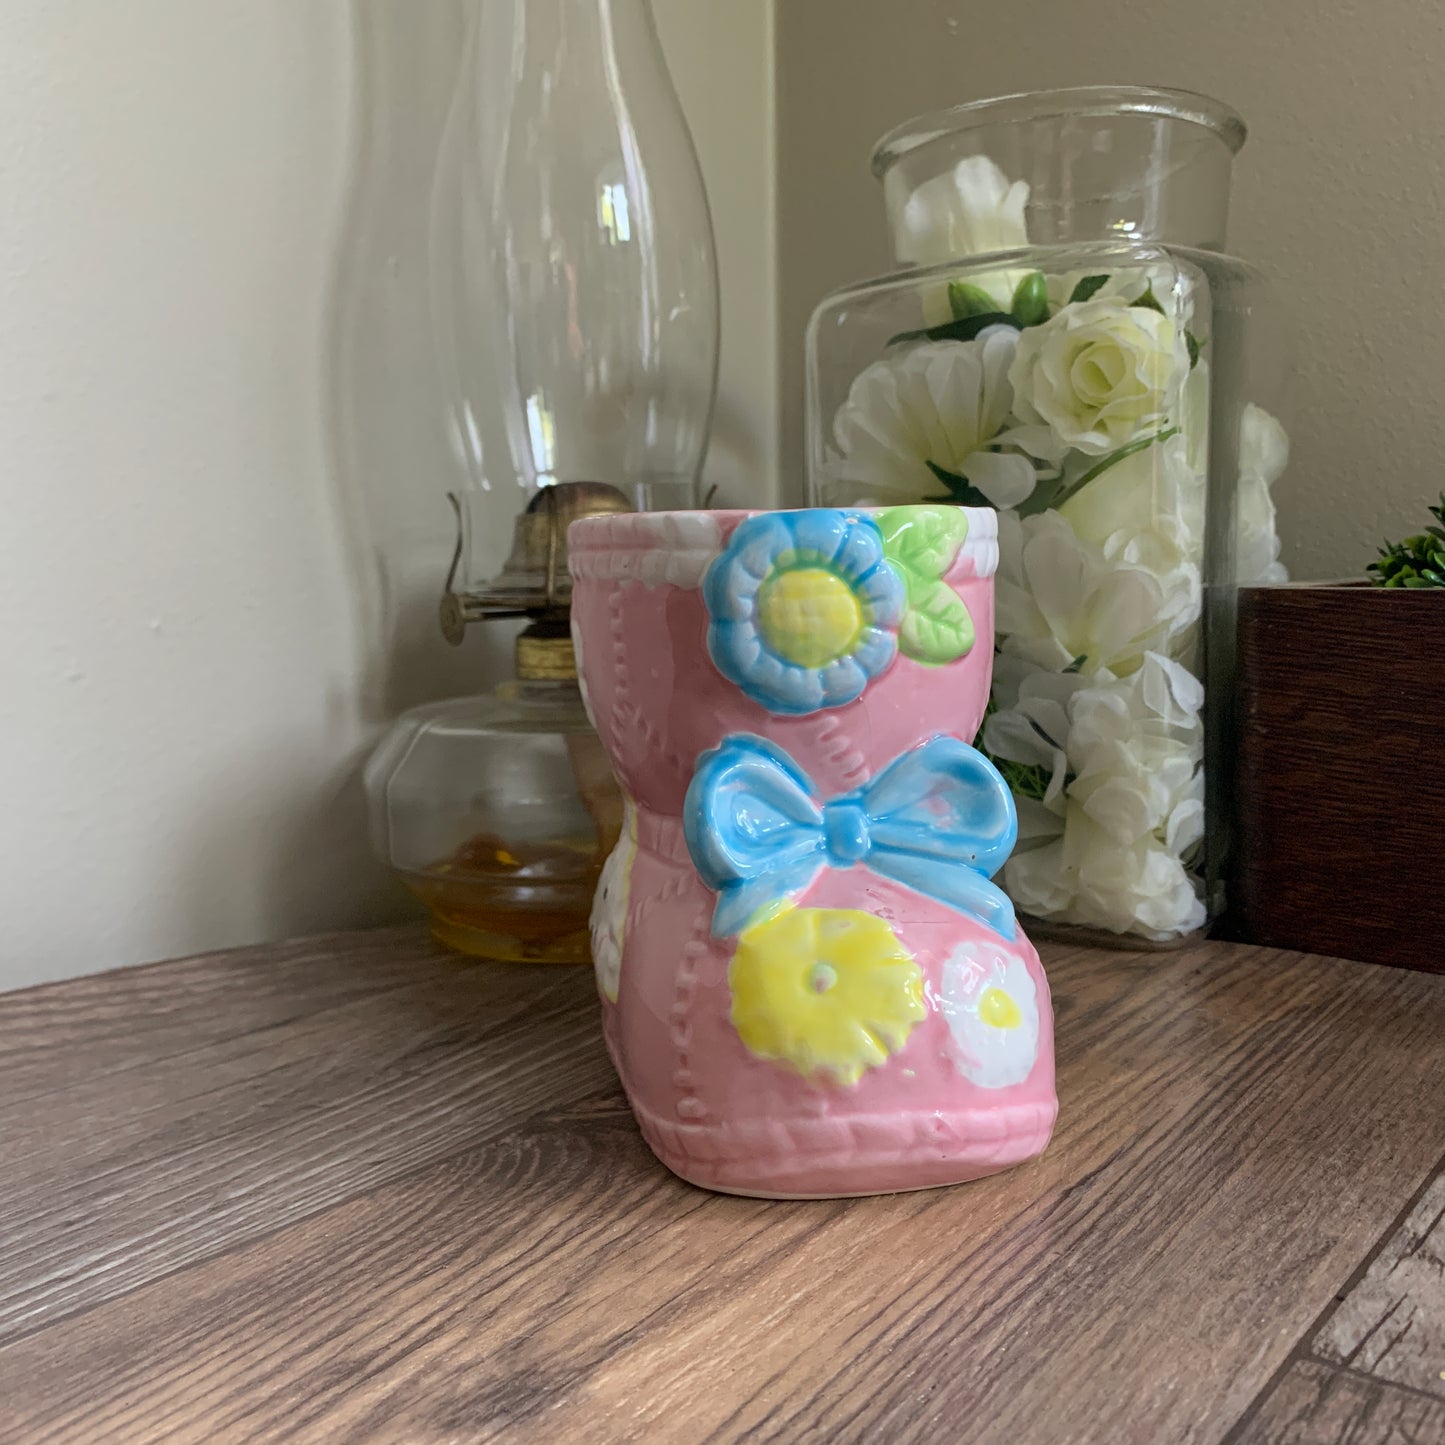 Pink Baby Bootie Ceramic Planter or Flower Vase Shower Gifts for Baby Girl